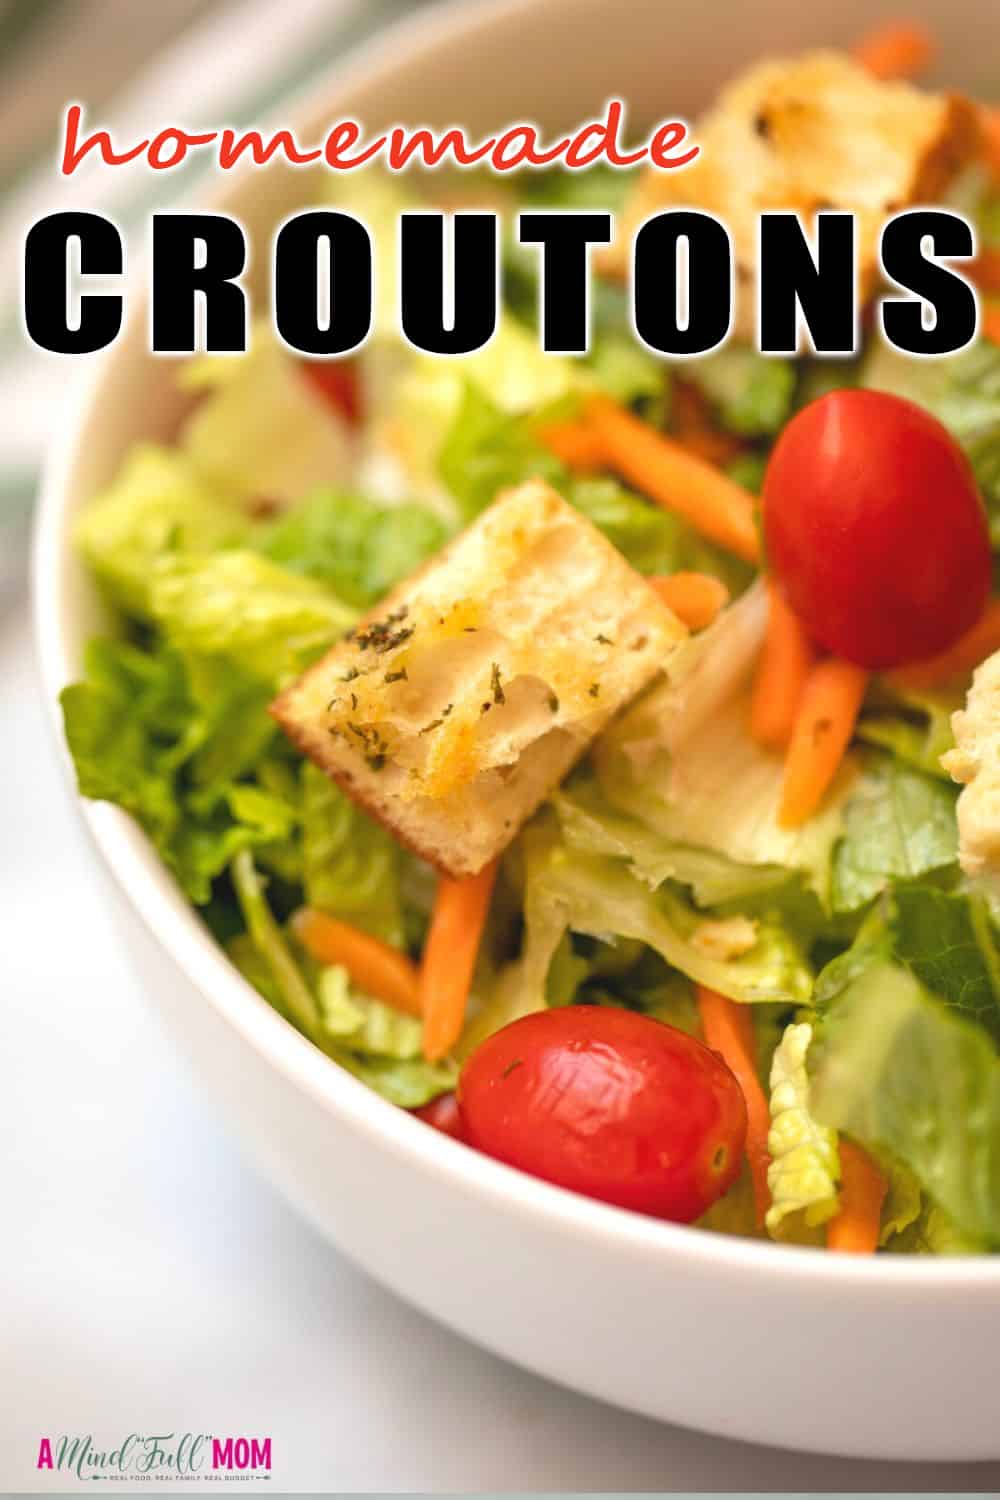 Give stale bread new life with this recipe for Seasoned Croutons. With just a handful of ingredients and a few minutes of time, you can make croutons that are perfectly seasoned and taste better than store-bought. They make the perfect addition to salad and soups.